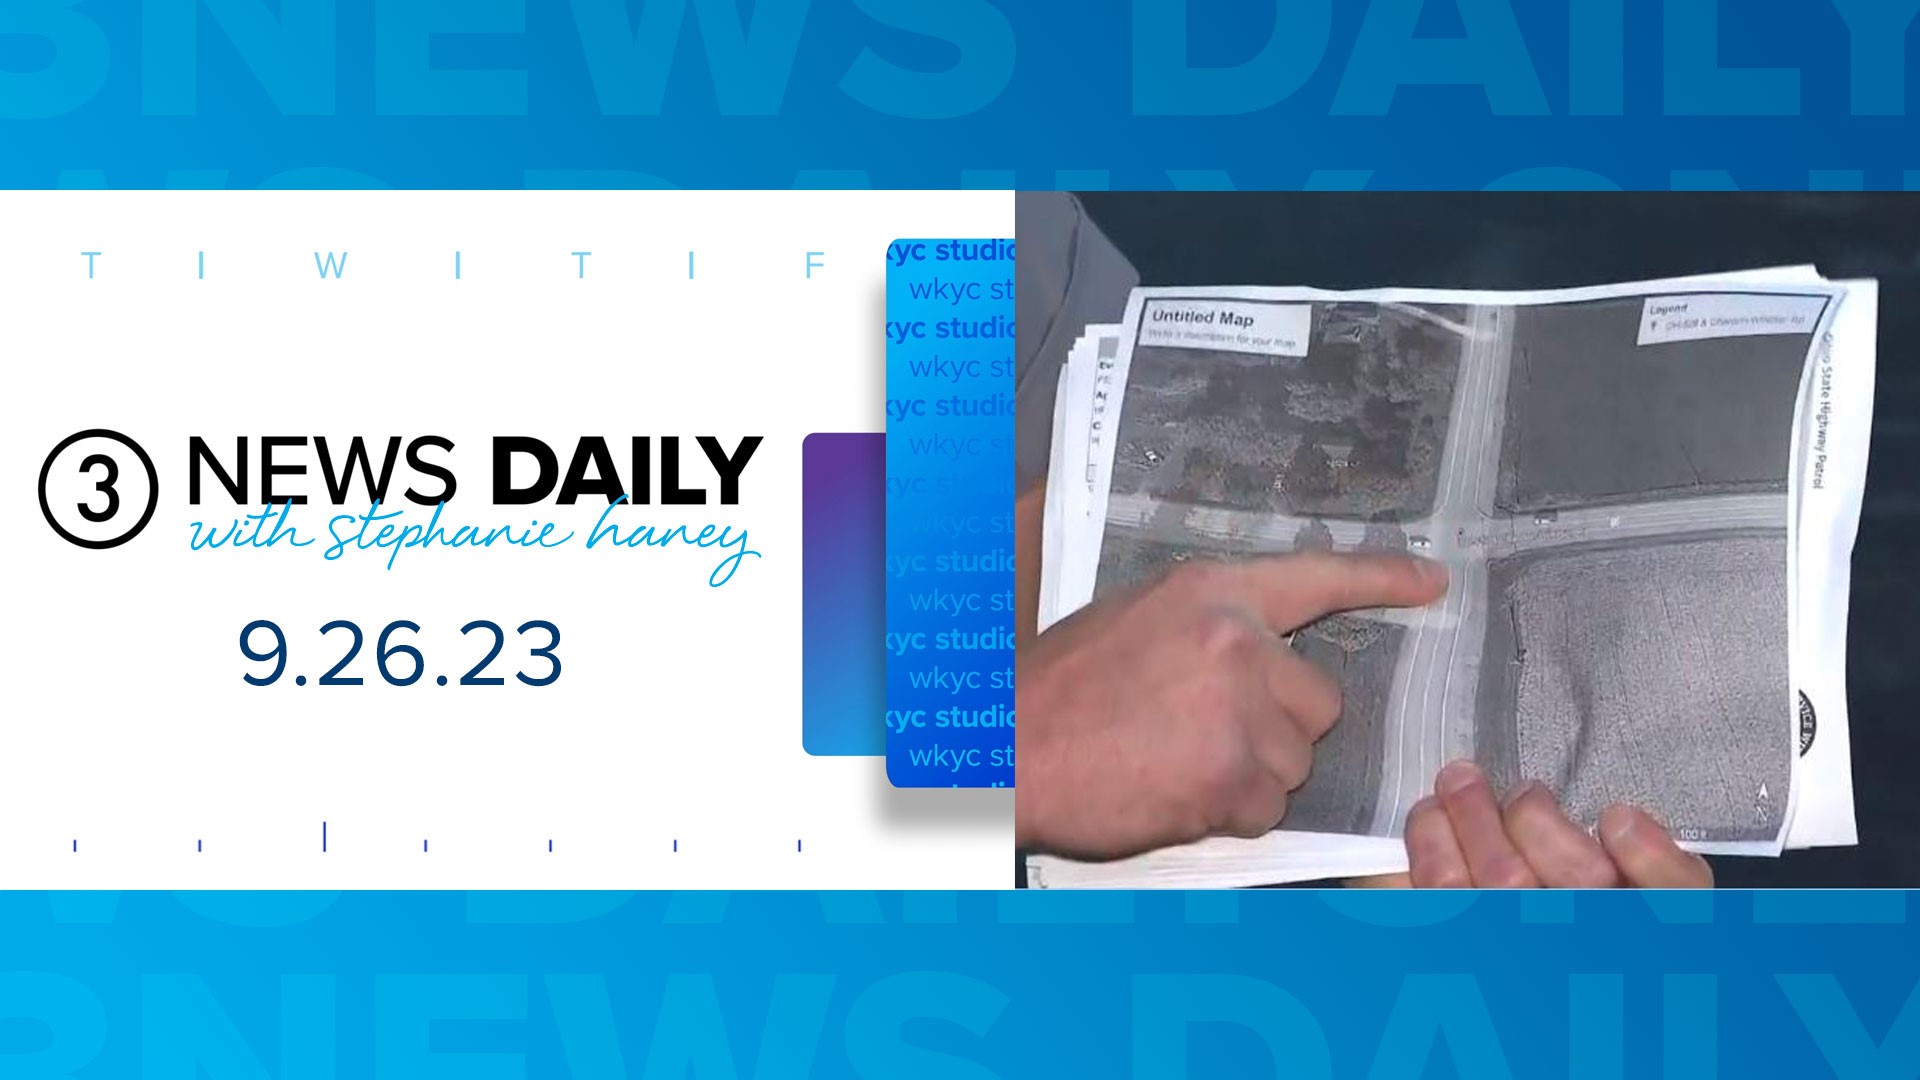 Jeep crashes into an ambulance killing a man waiting to be taken to hospital while injuring EMS workers, and more on 3News Daily with Stephanie Haney